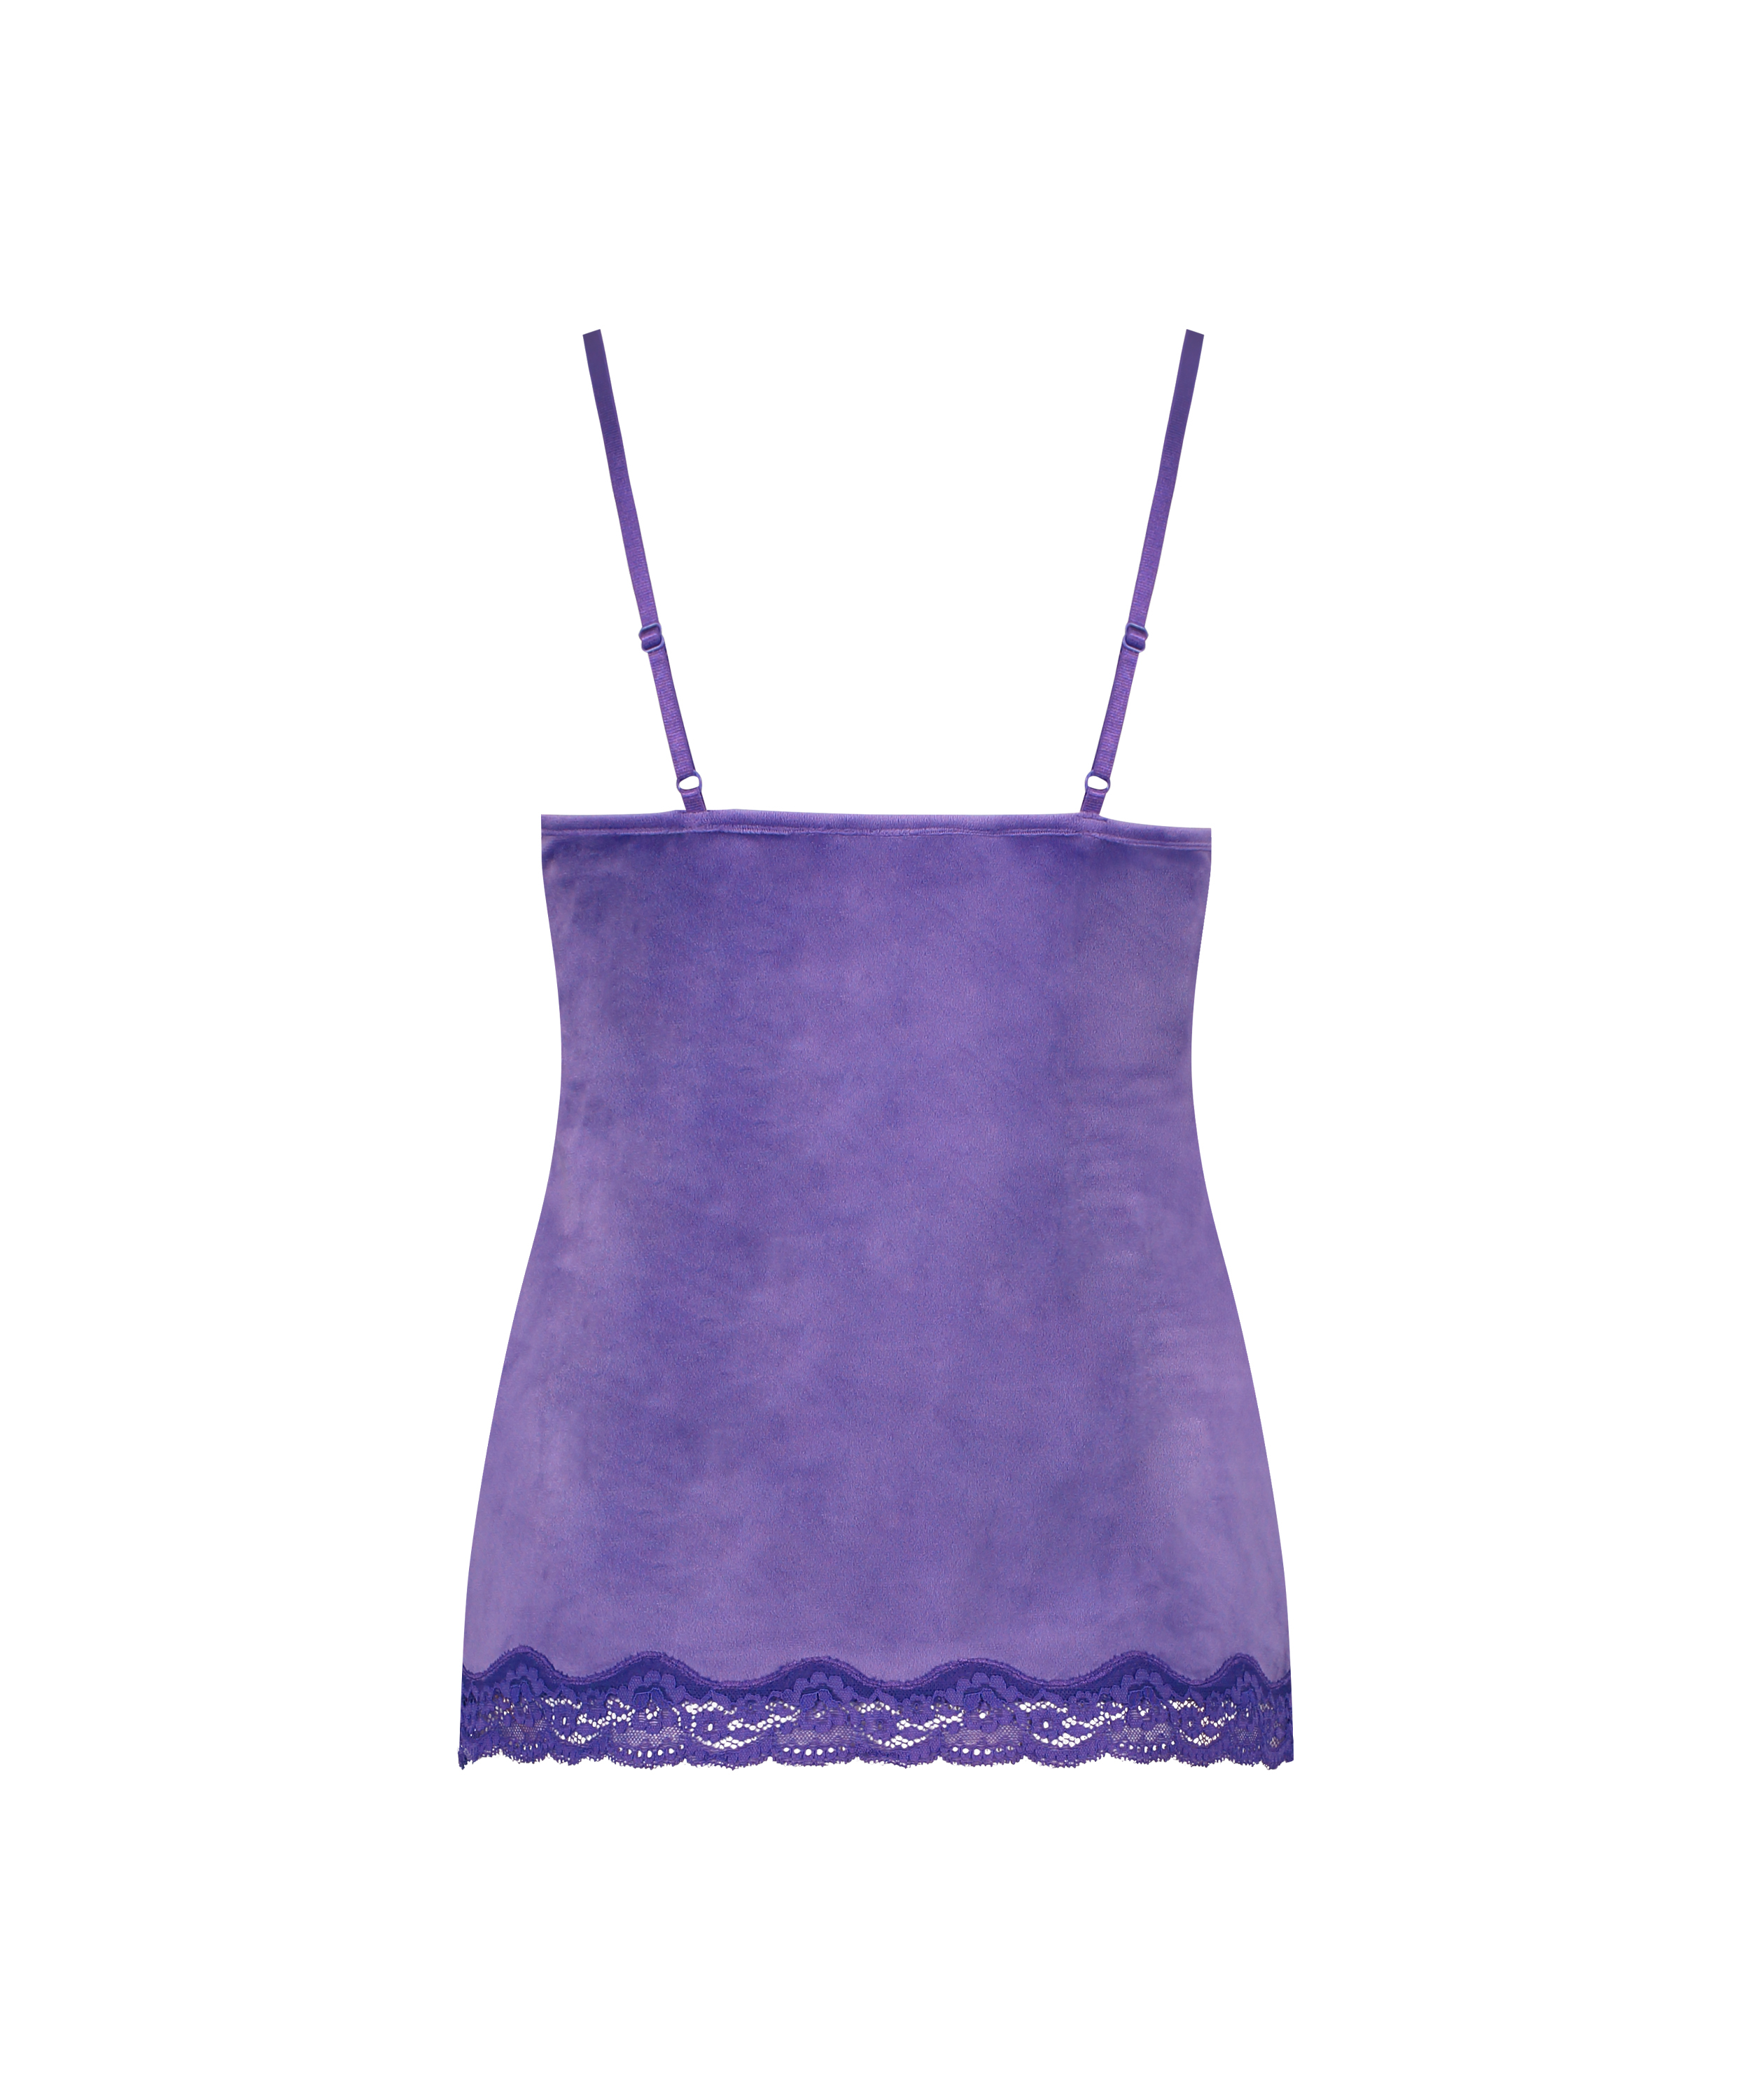 Cami top Velours Lace, Paars, main